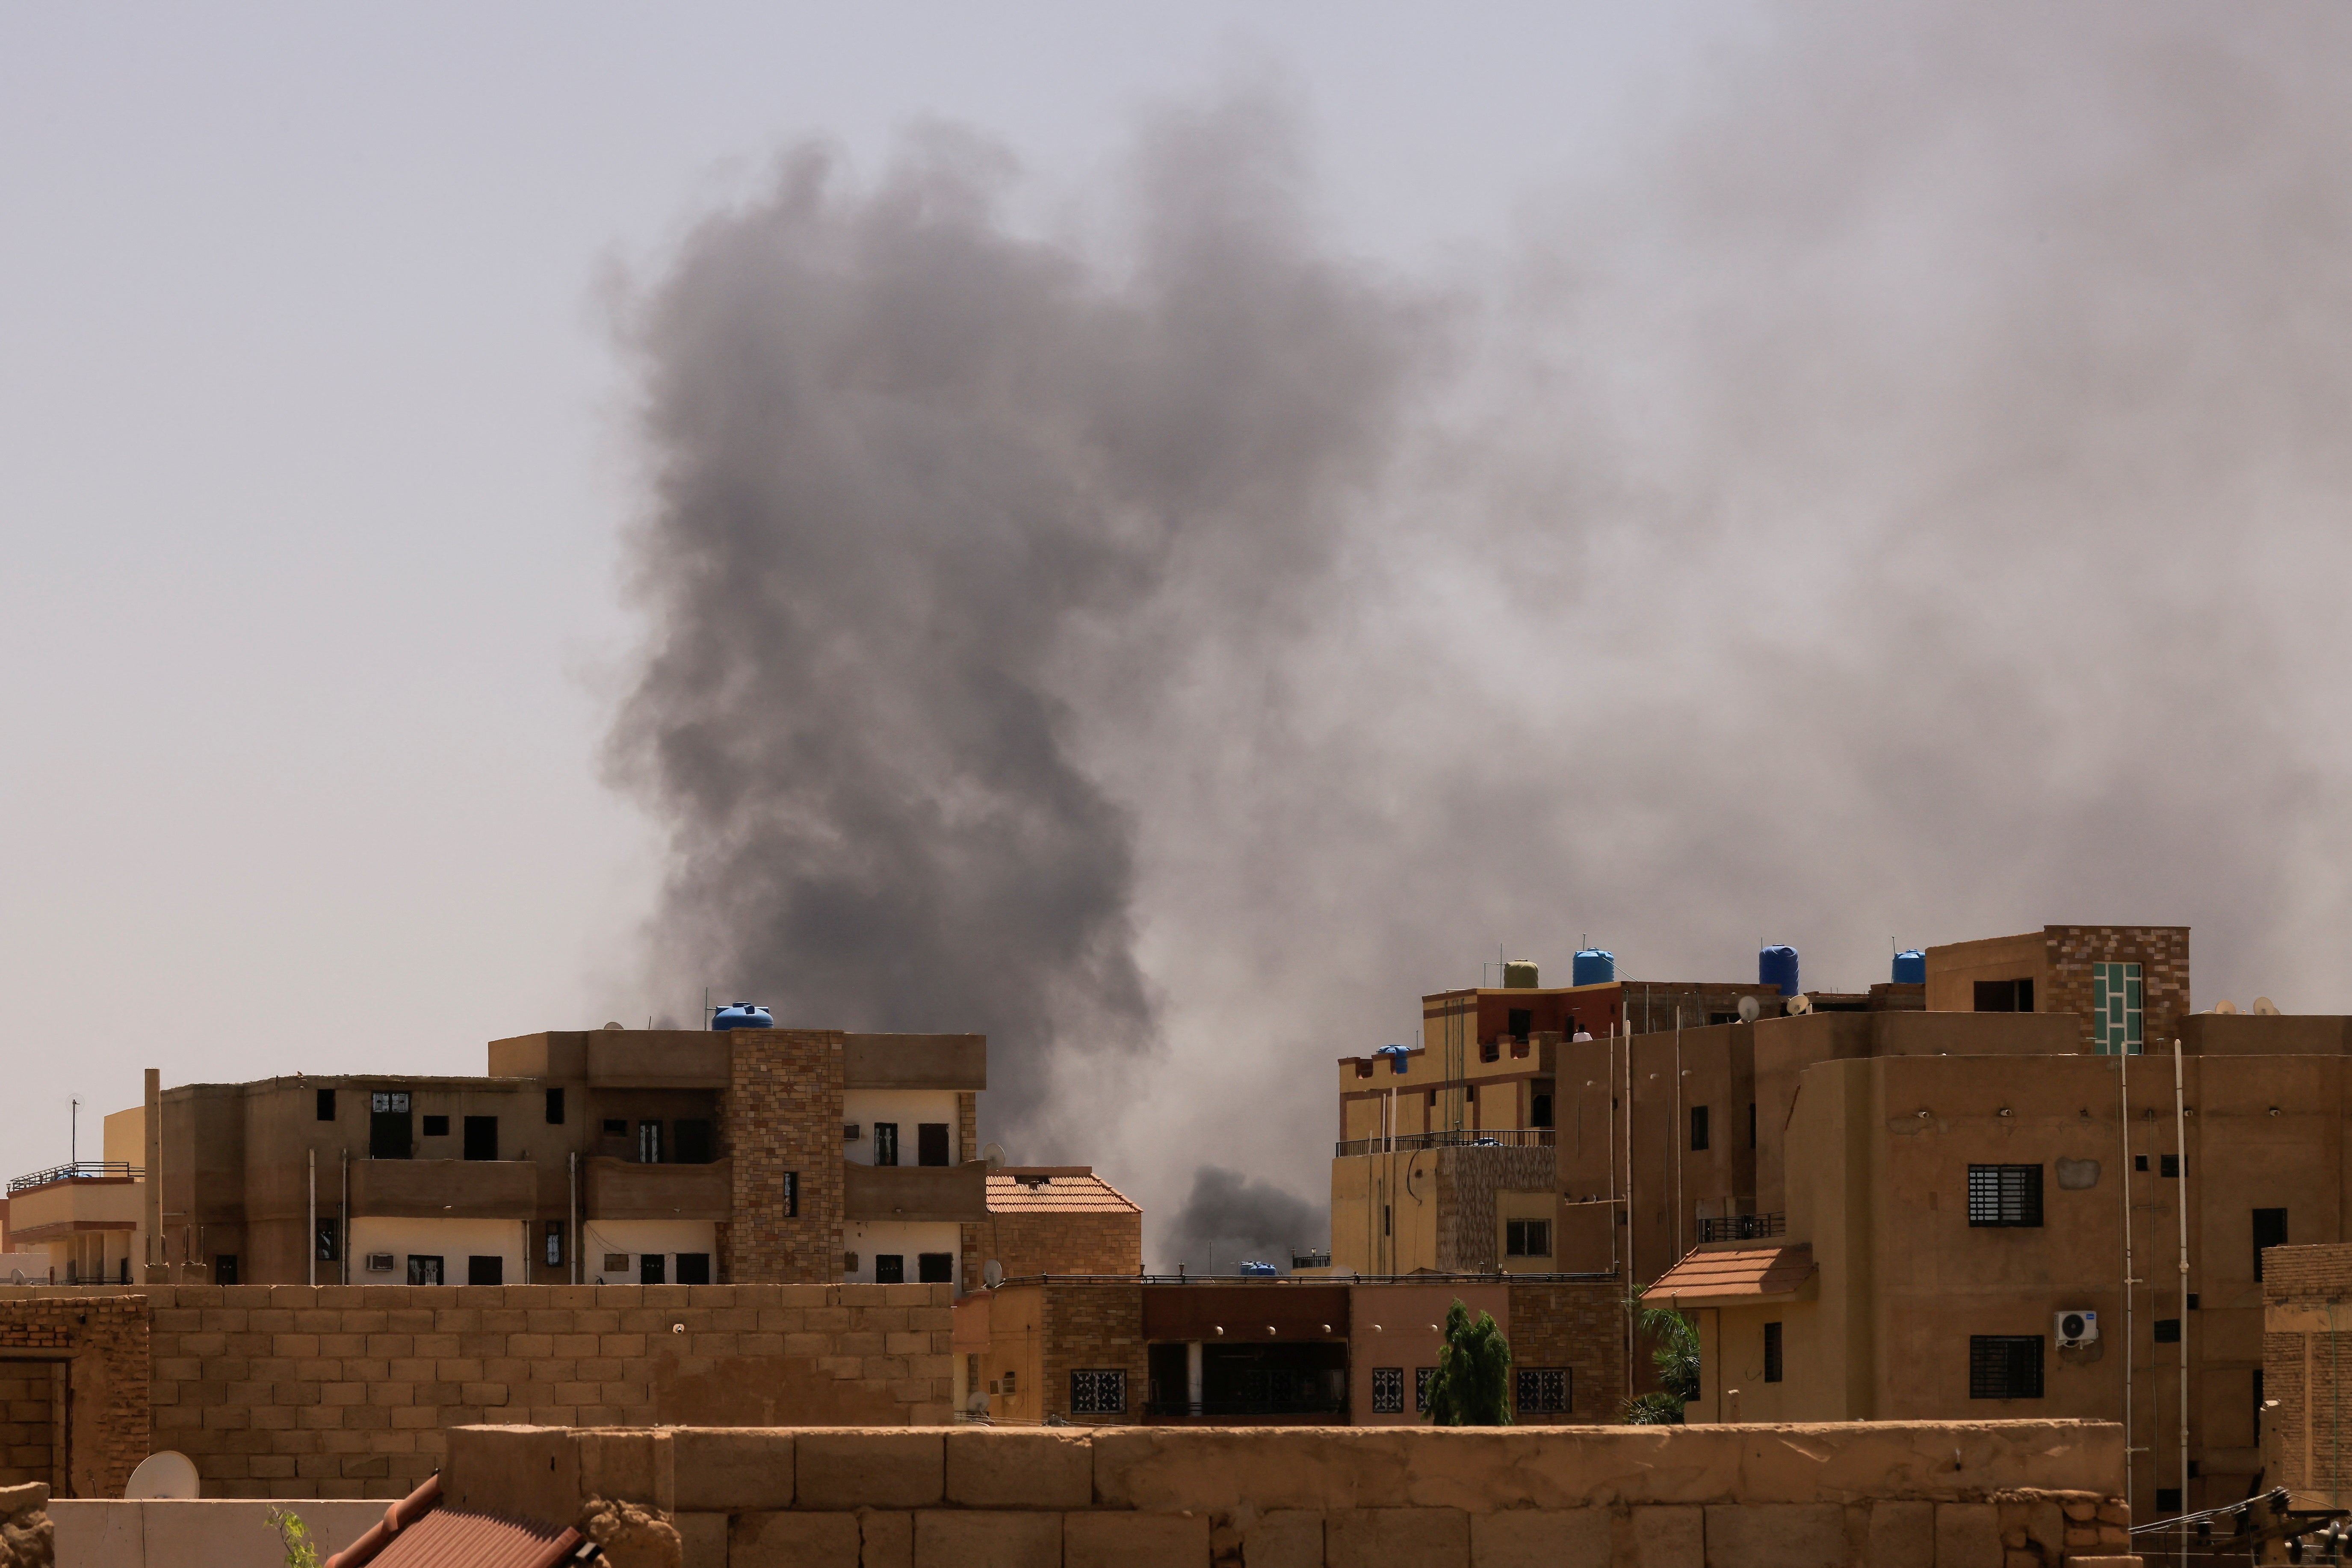 Smoke is seen rise from buildings during clashes between the paramilitary Rapid Support Forces and the army in Khartoum